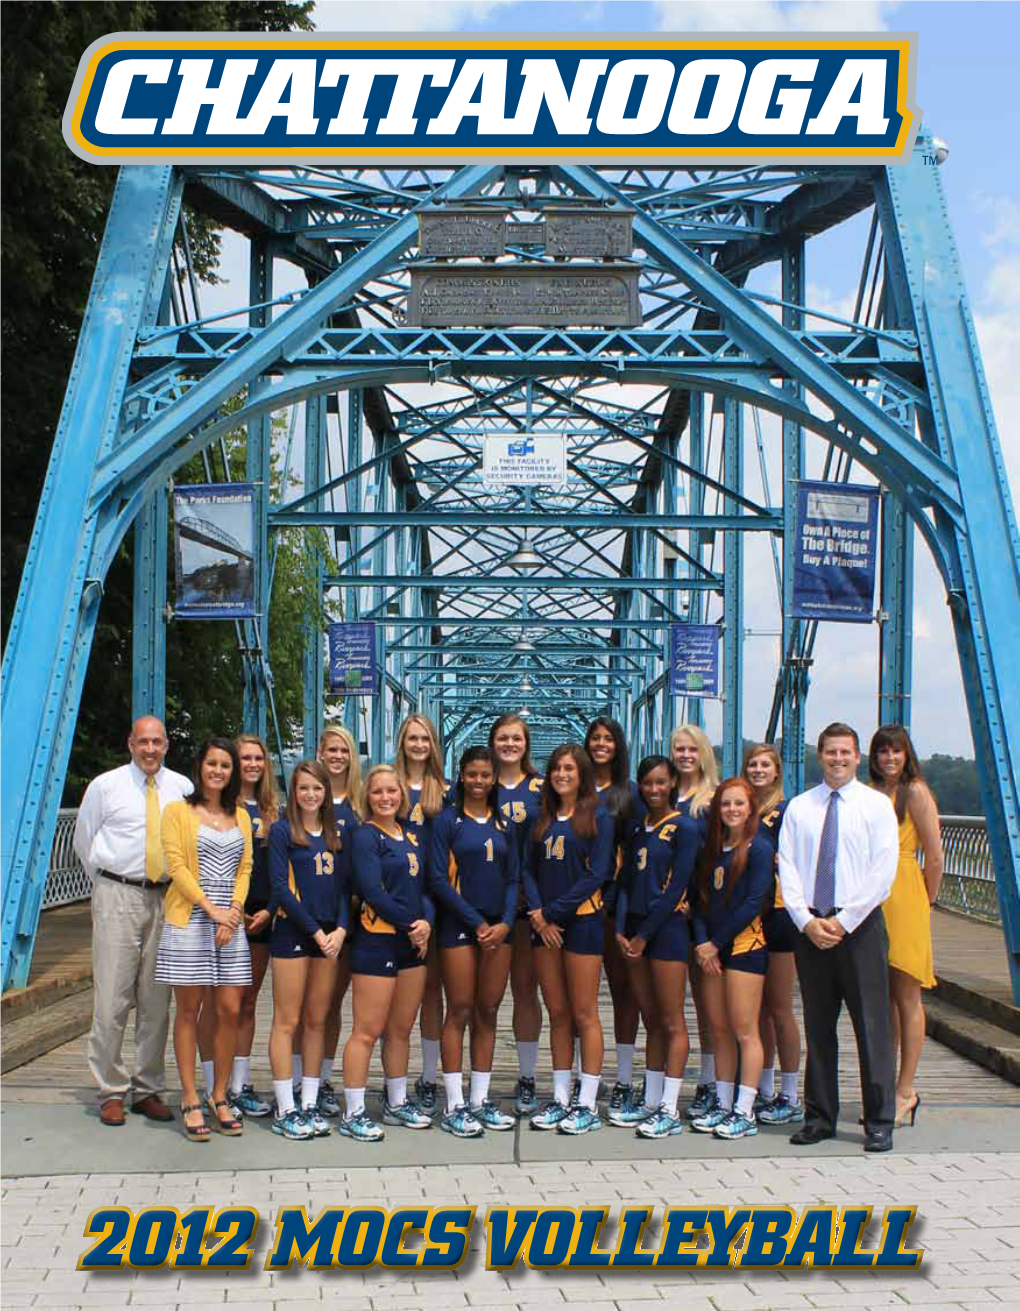 2012 MOCS VOLLEYBALL We Are a Family